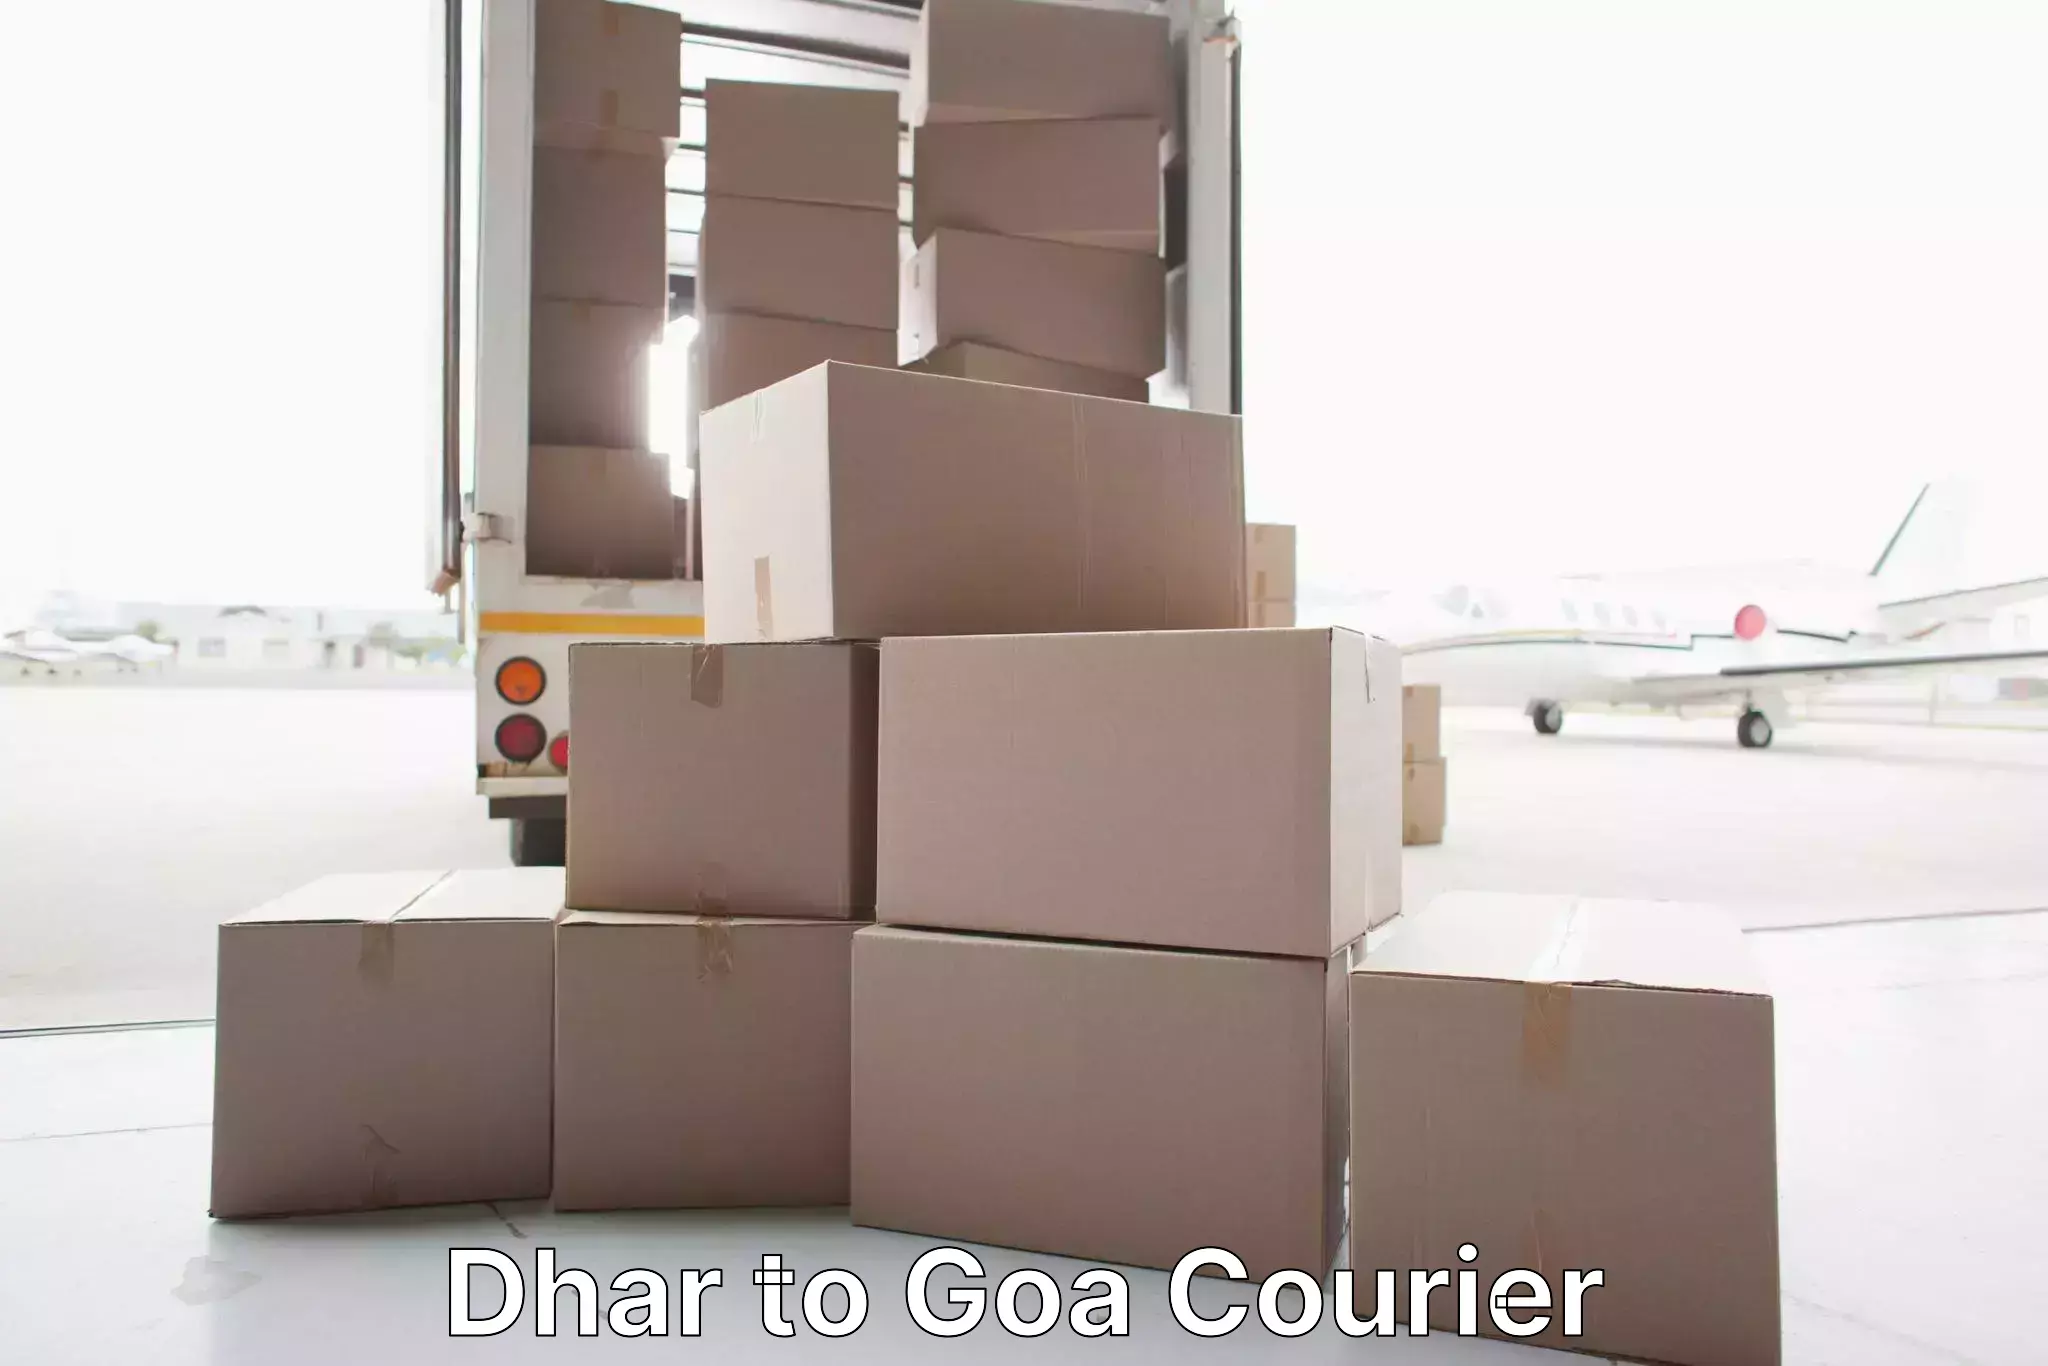 Full-service relocation Dhar to Goa